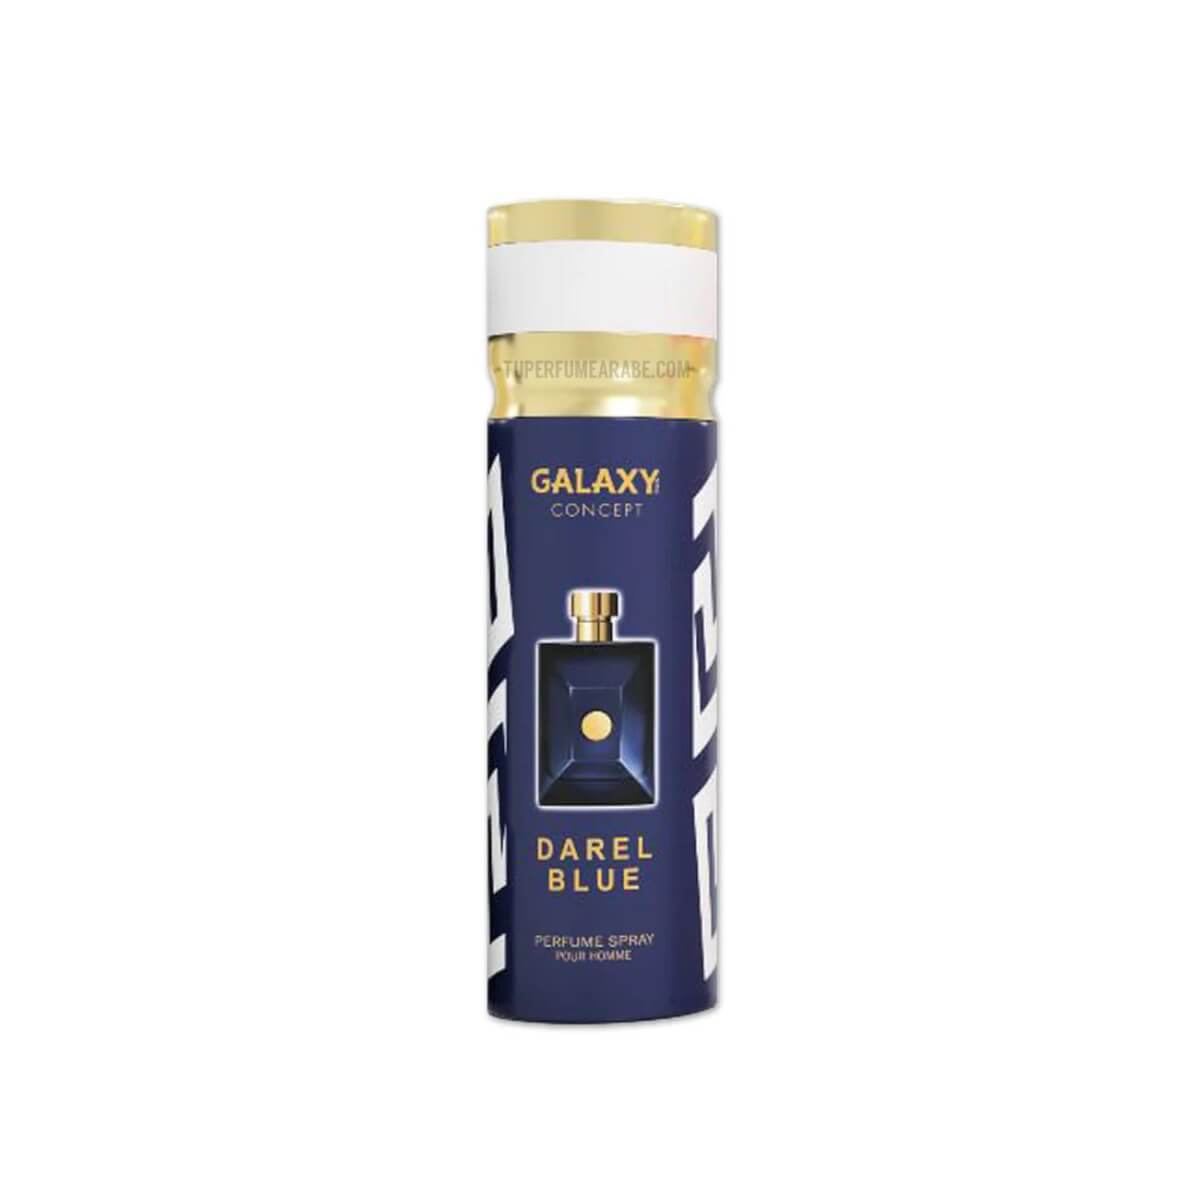 Galaxy Concept Darel Blue 200Ml Parfum Spray Pour Homme (Inspired By Versace Dylan Blue)